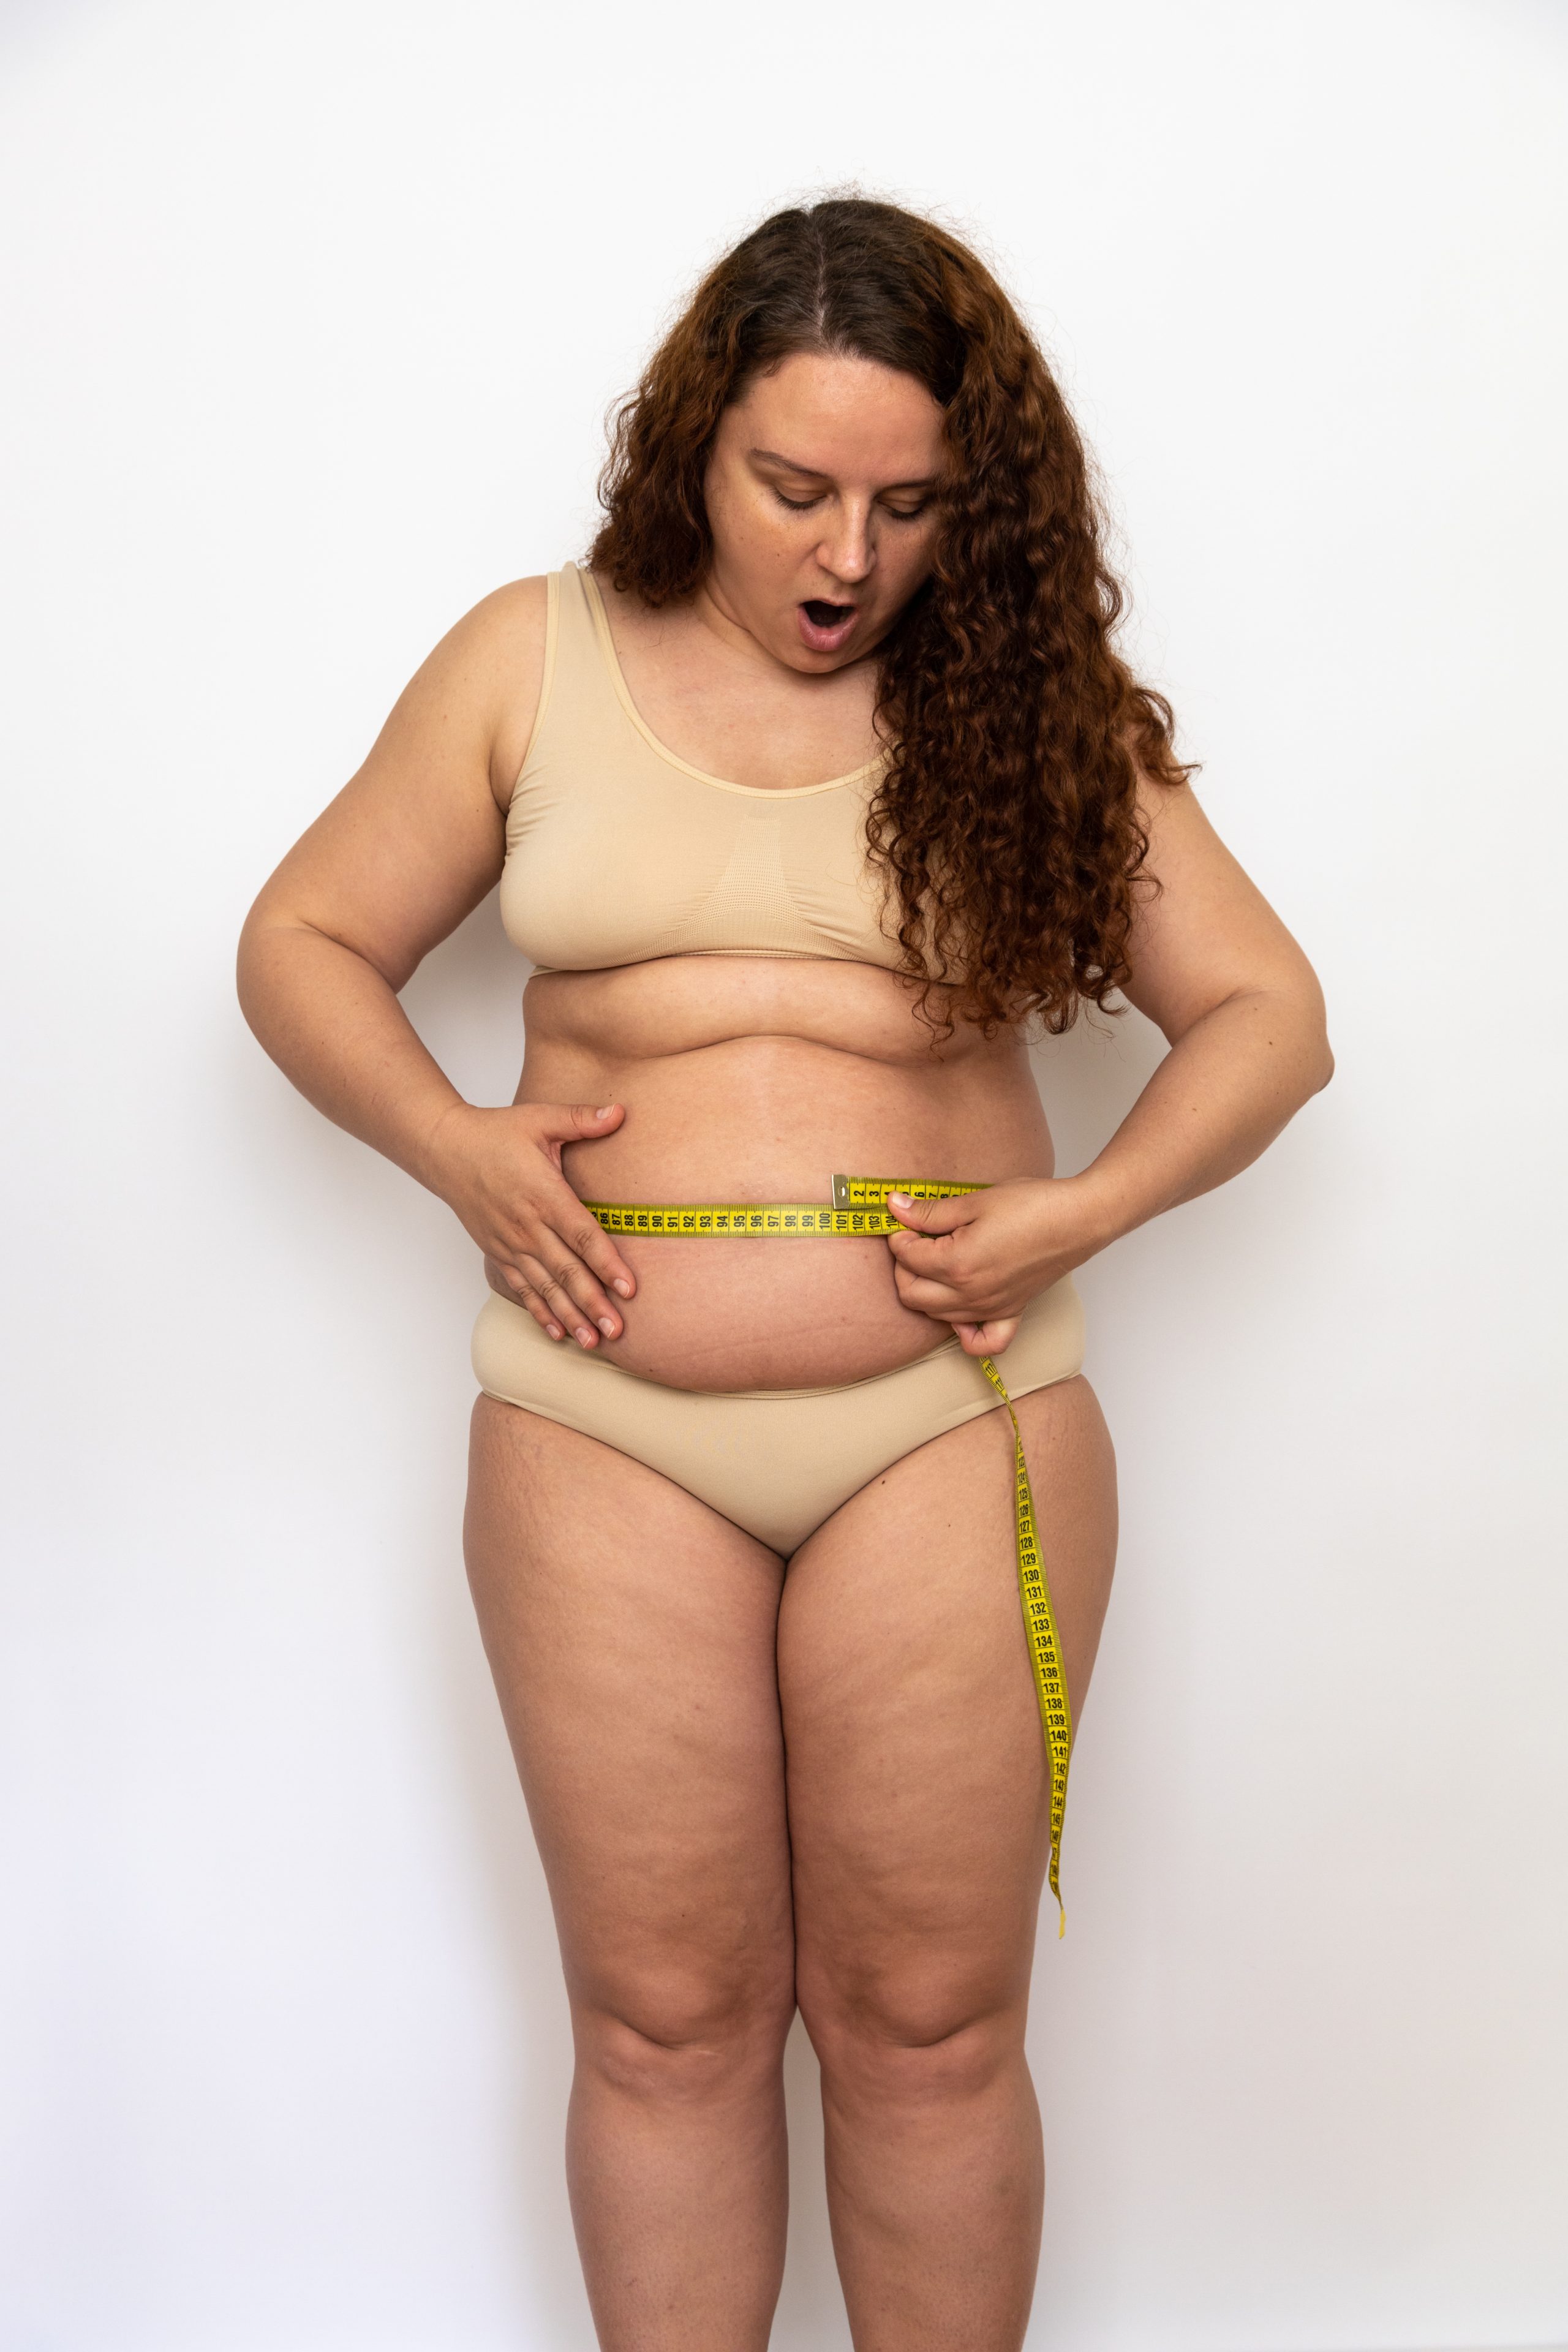 Portrait of shocked plump middle aged woman with curly hair wearing beige underwear, measuring waist with yellow tape.